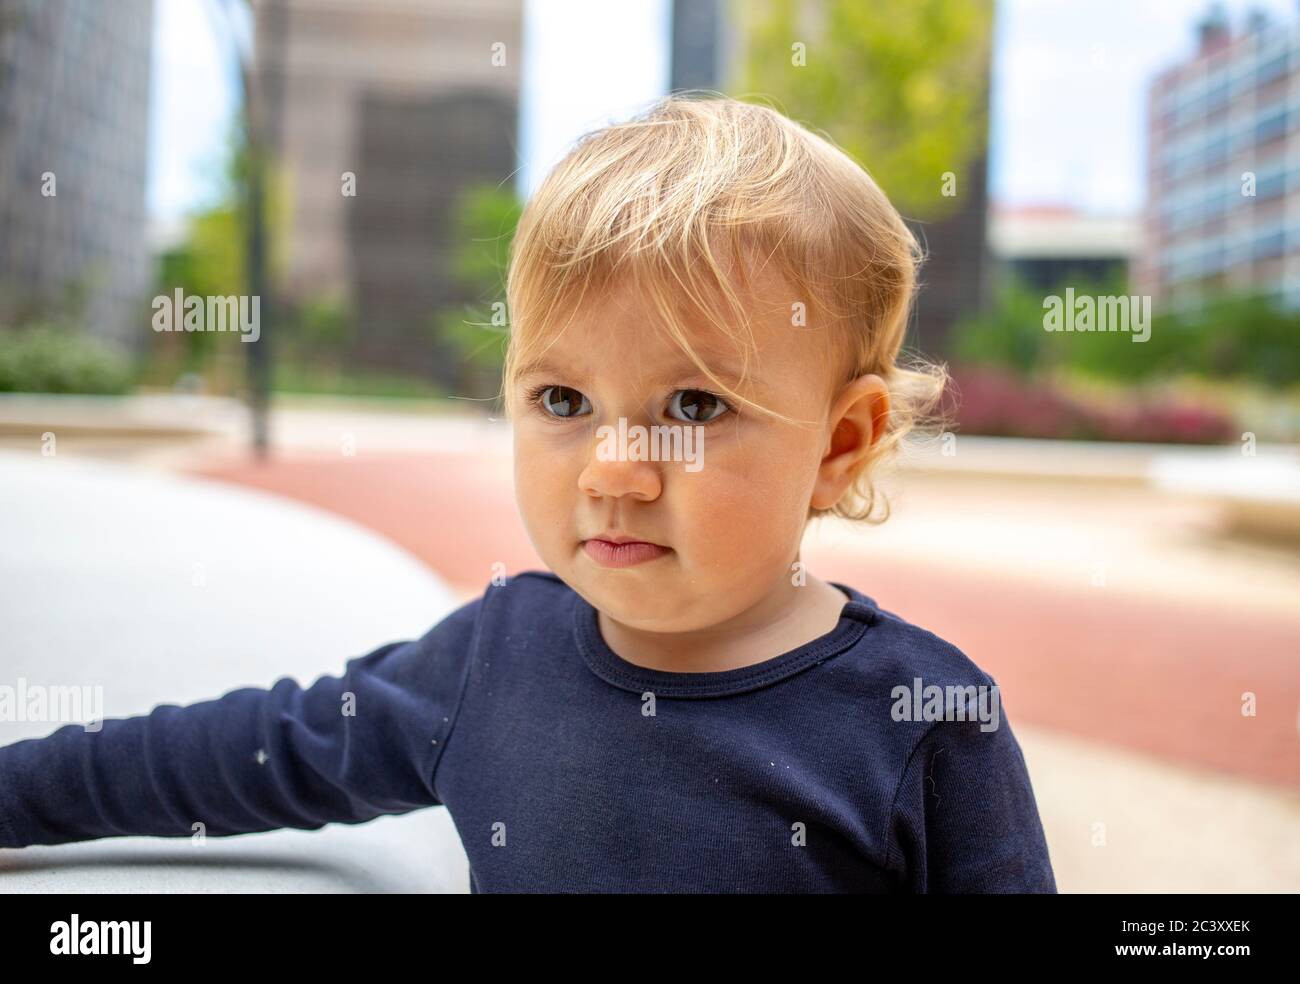 cute baby girl outdoors in a park Stock Photo